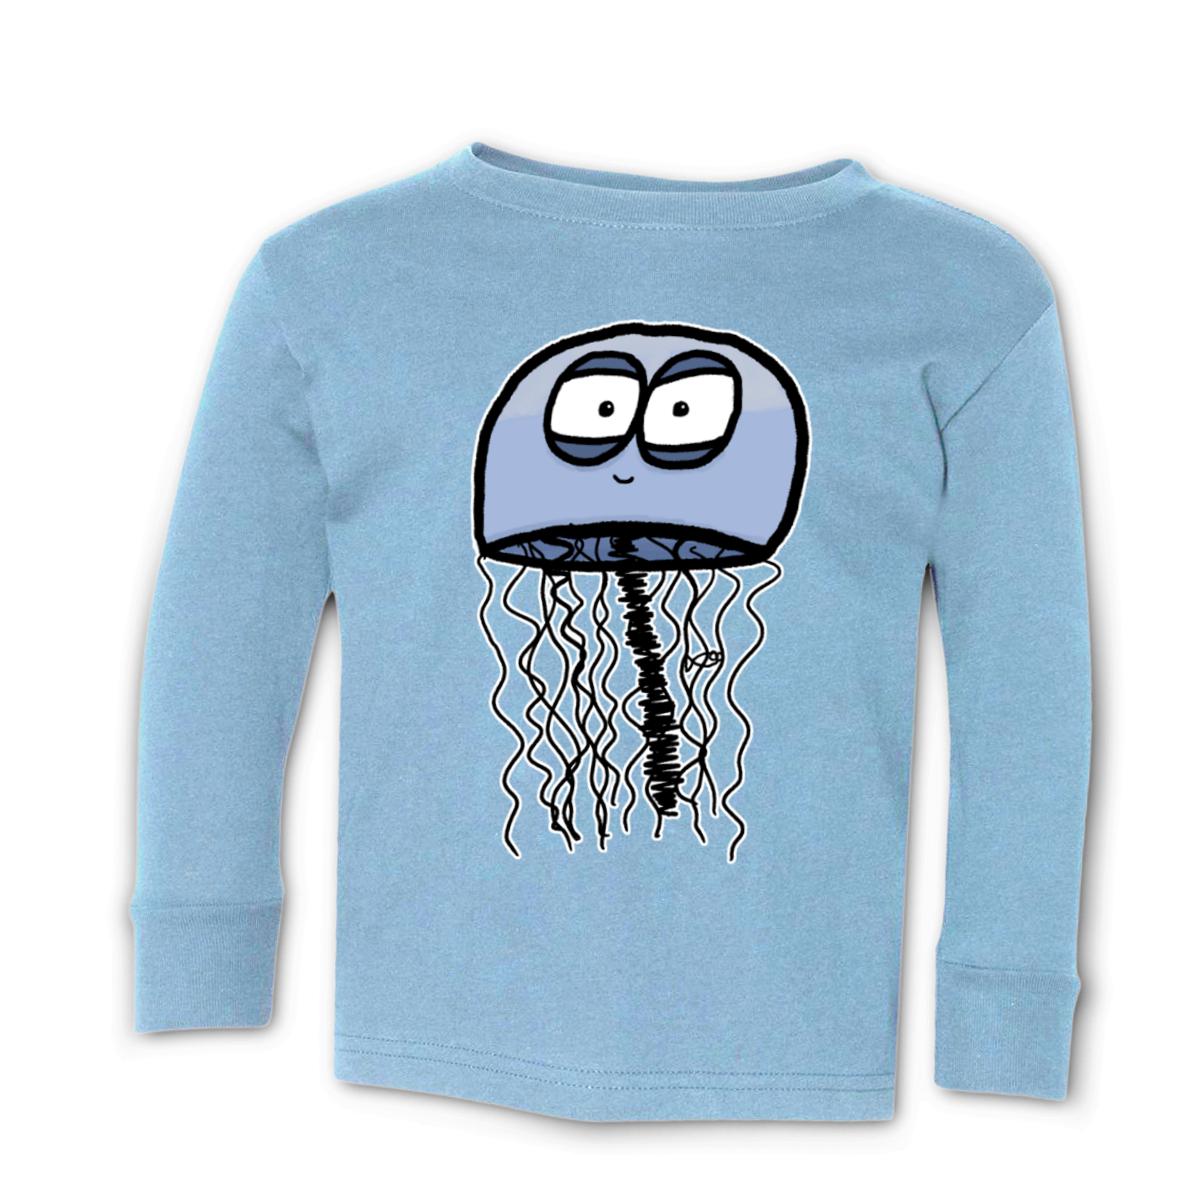 Jelly Fish Toddler Long Sleeve Tee 56T light-blue